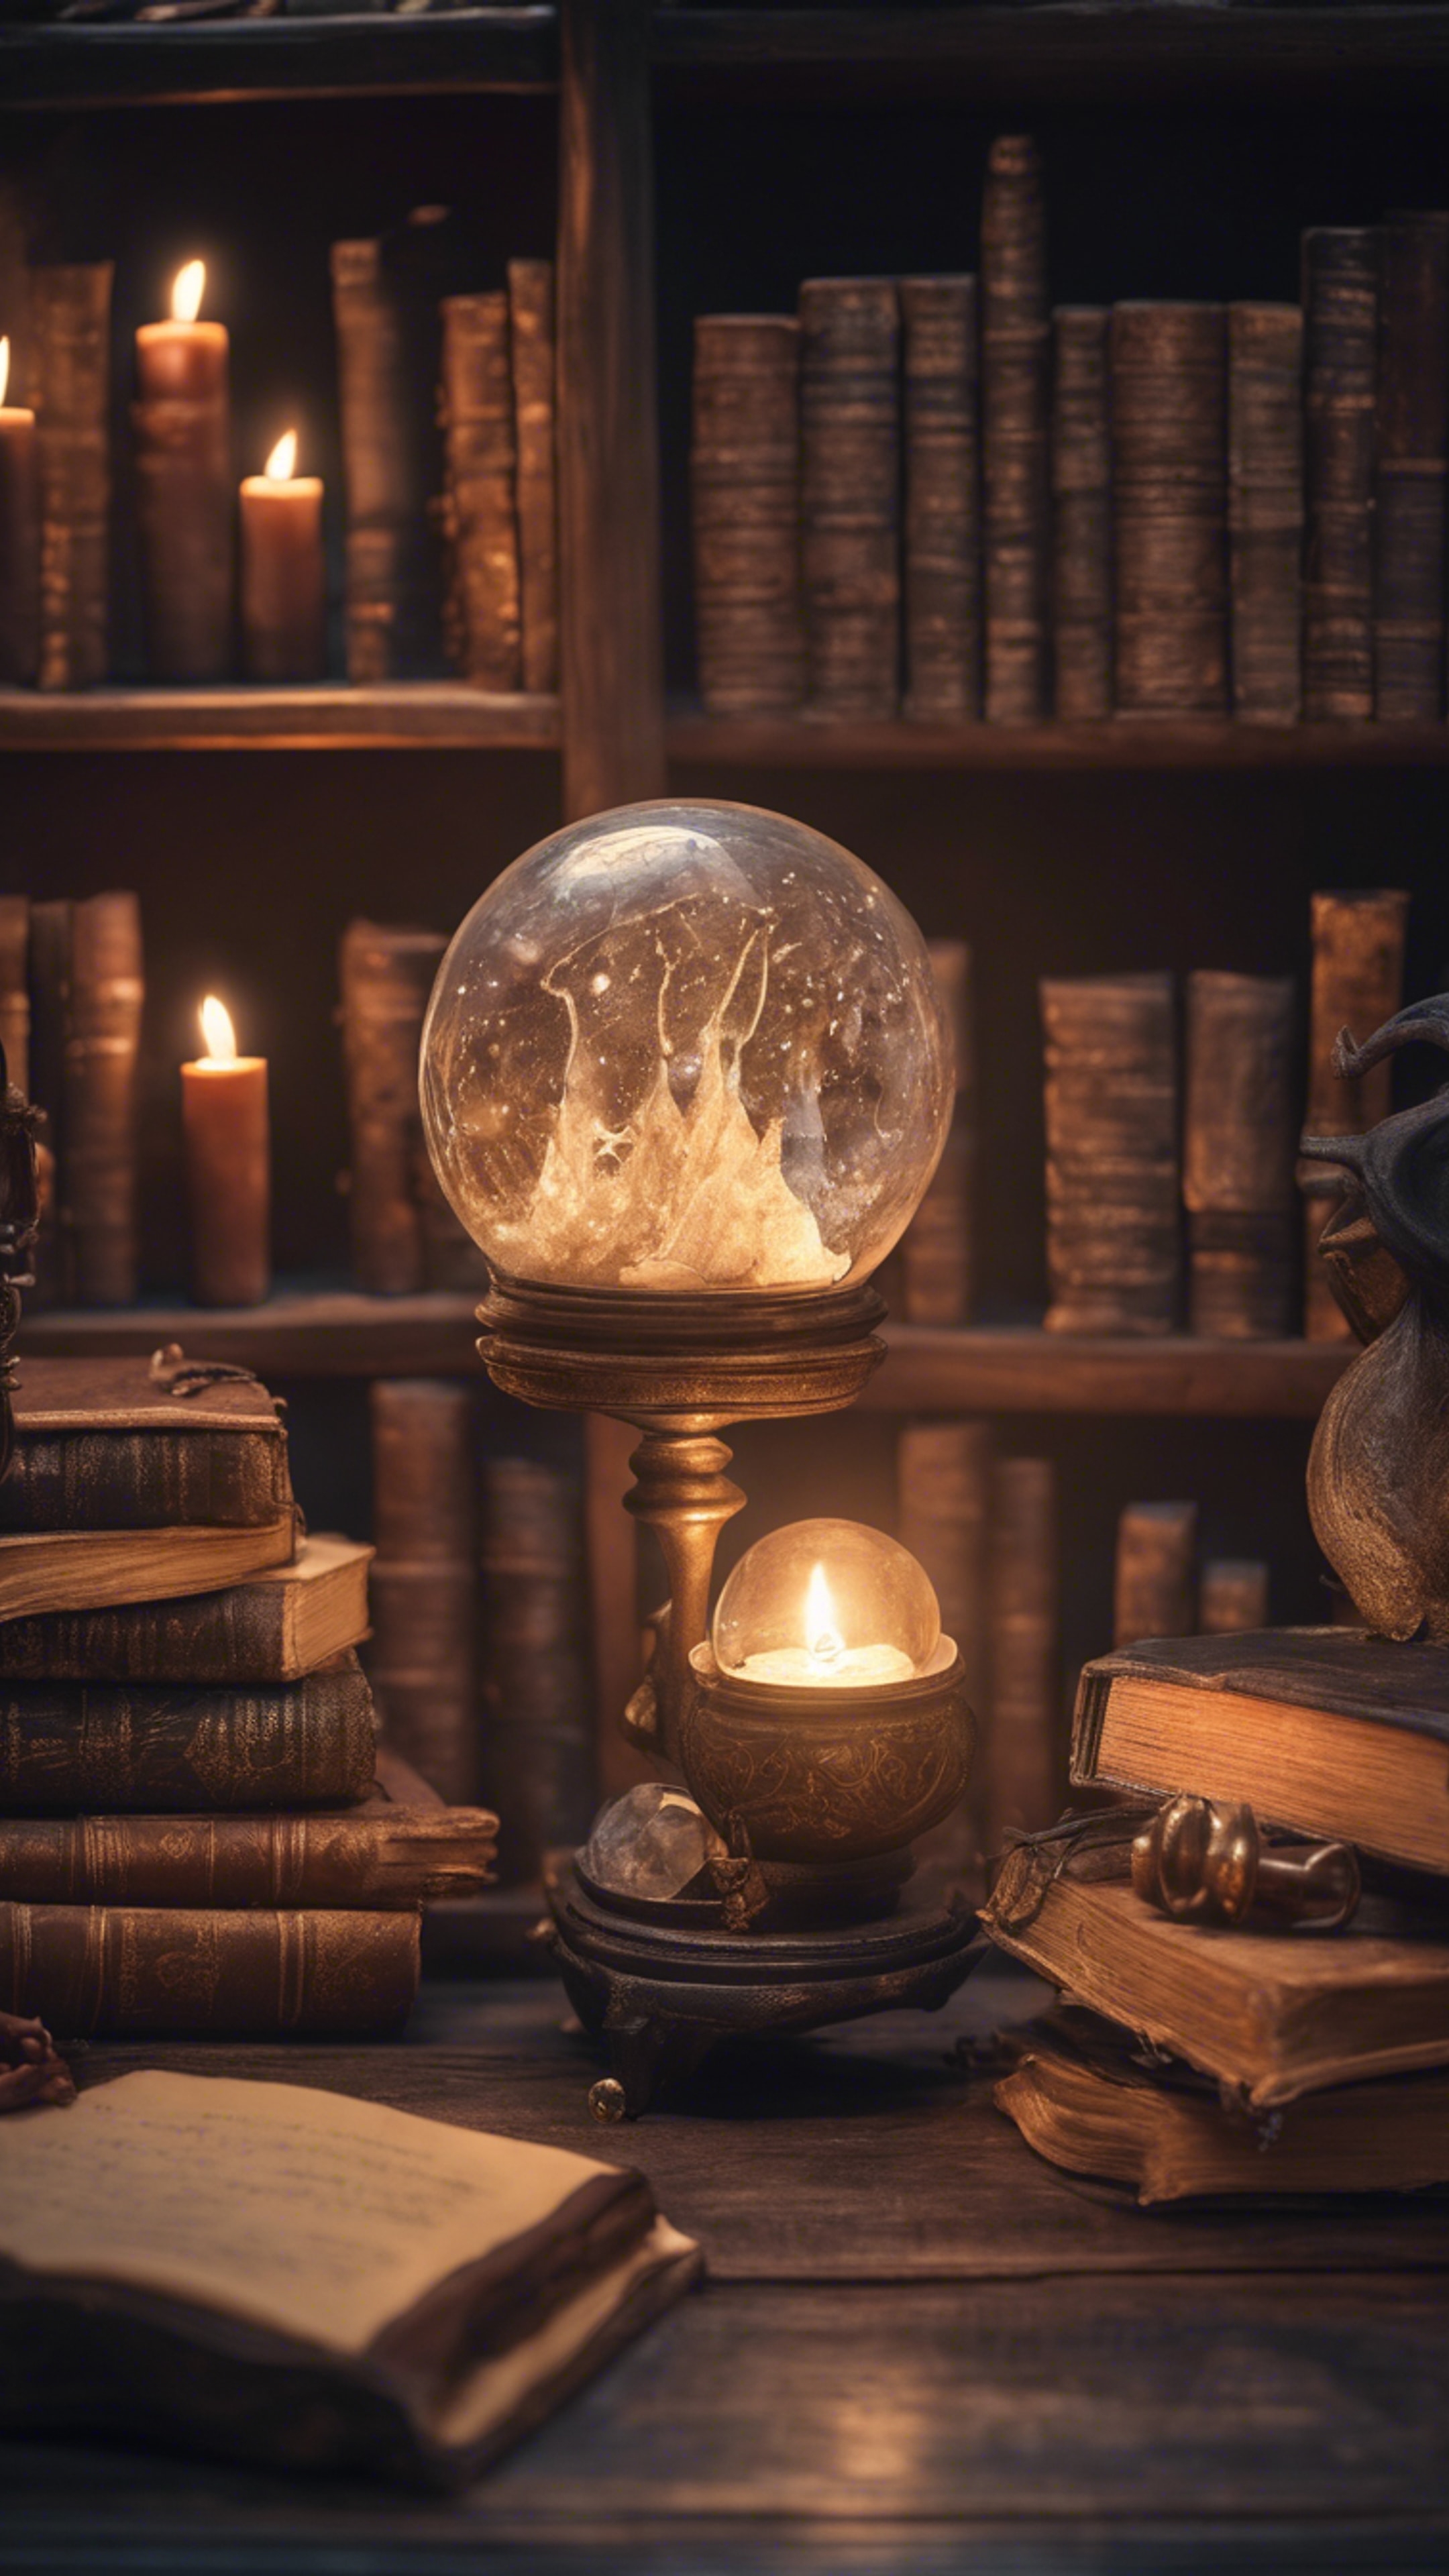 A cozy mystical scene with a wizard’s study room - magical artifacts, rows of spell books, a crystal ball, and a cauldron brewing a potion. Дэлгэцийн зураг[df00e949c5584759a81e]